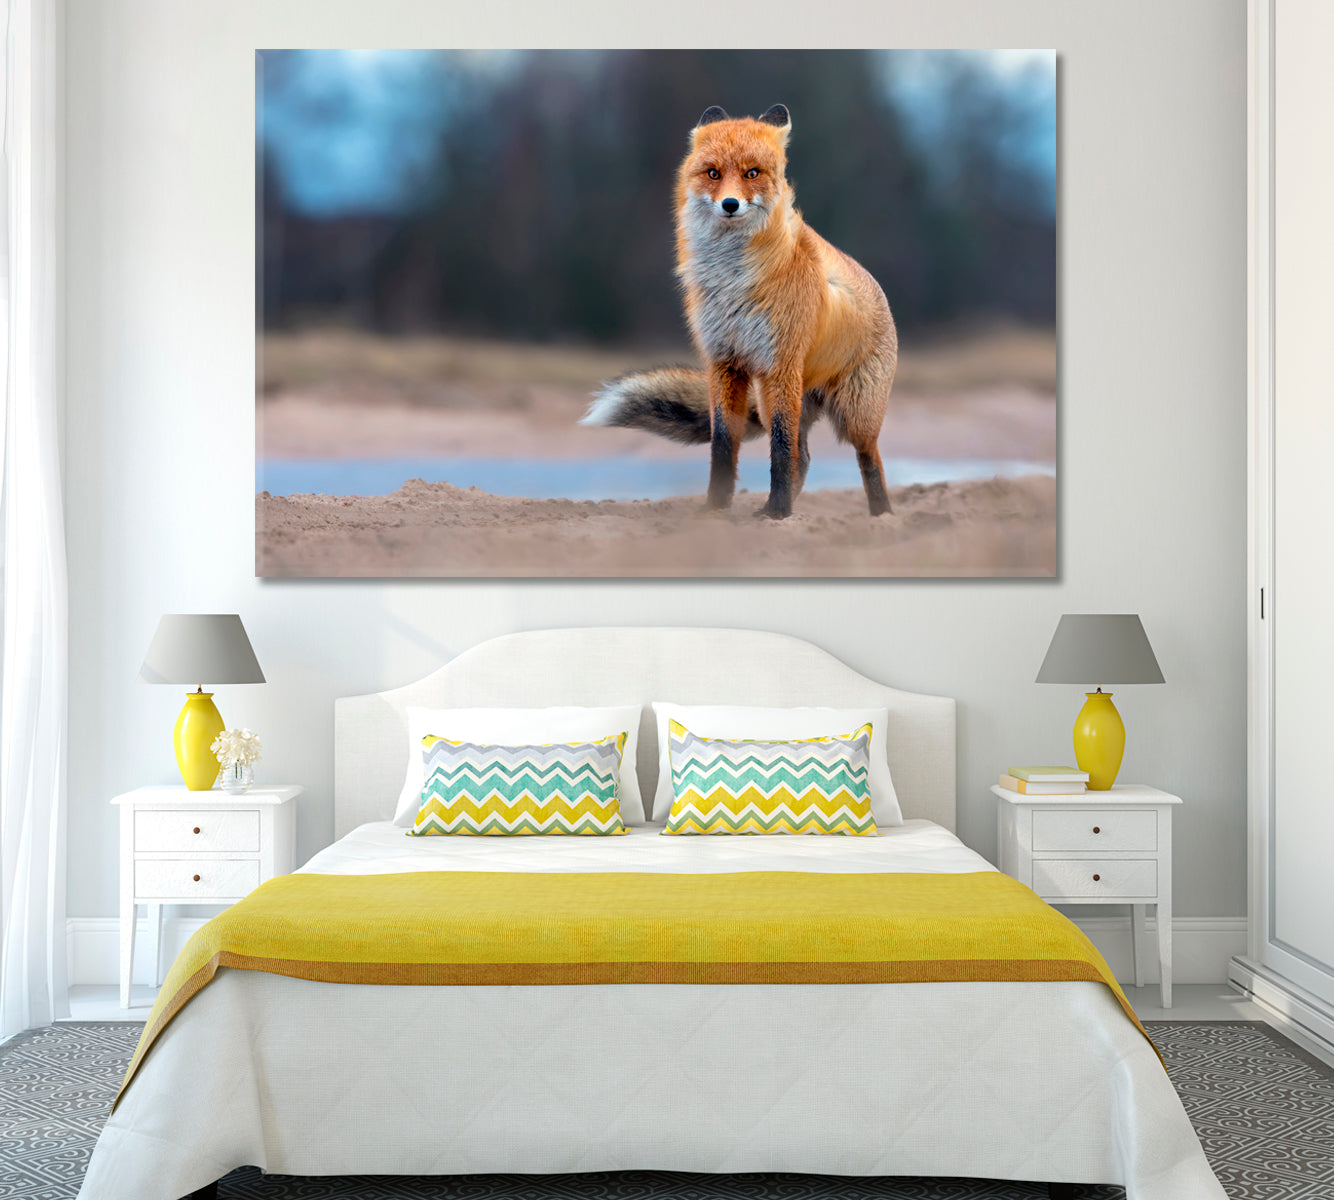 Funny Red Fox Canvas Print ArtLexy 1 Panel 24"x16" inches 